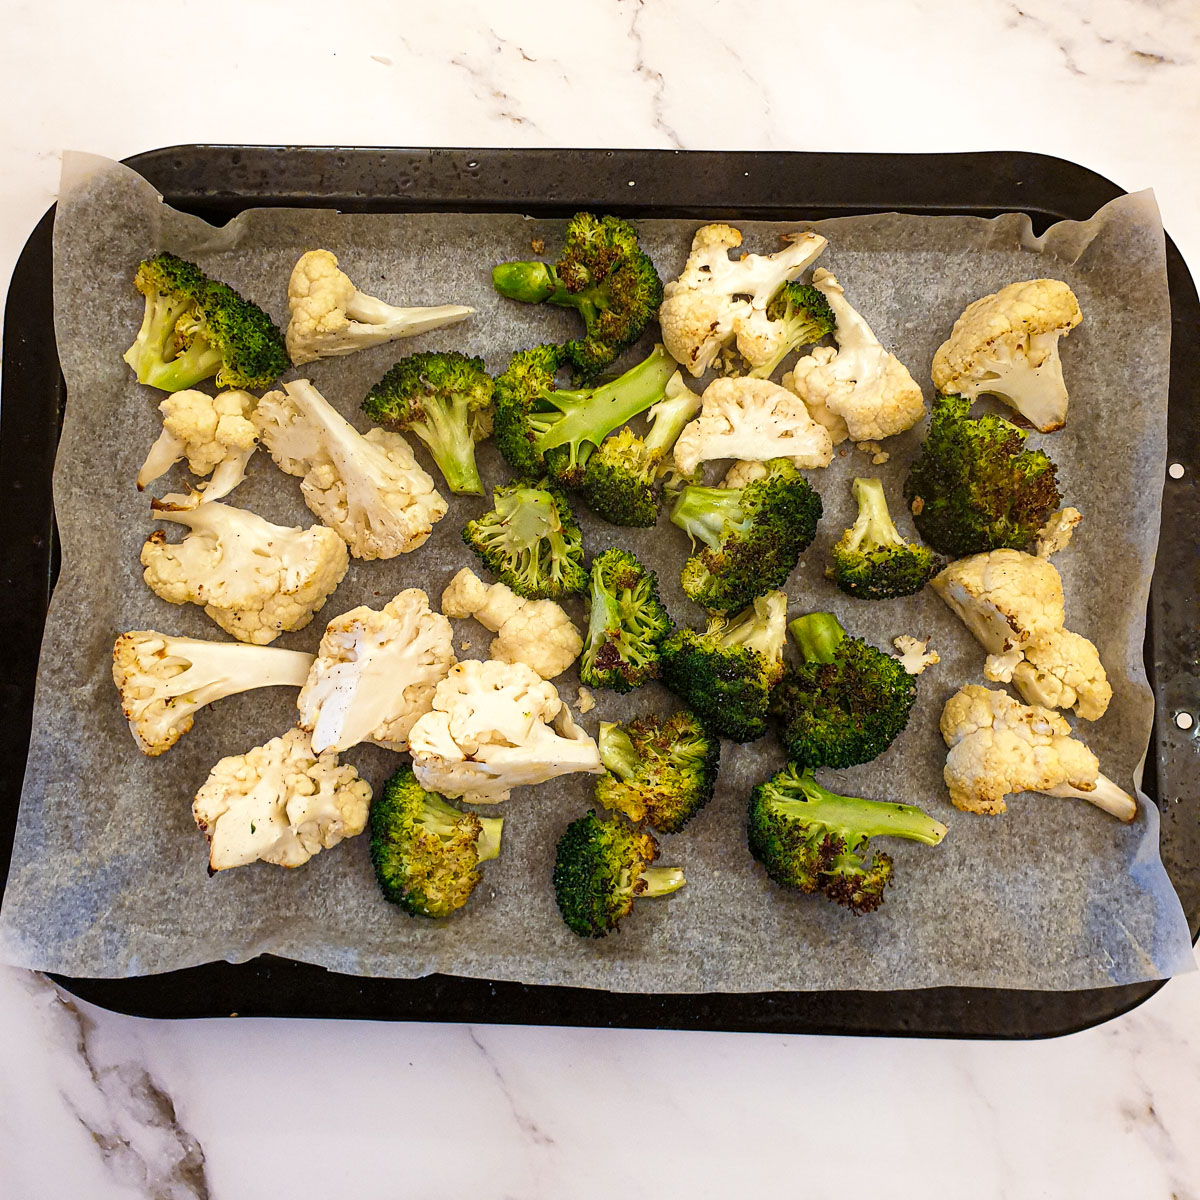 Cauliflower and broccoli florets on a baking sheet once they have browned in the oven.